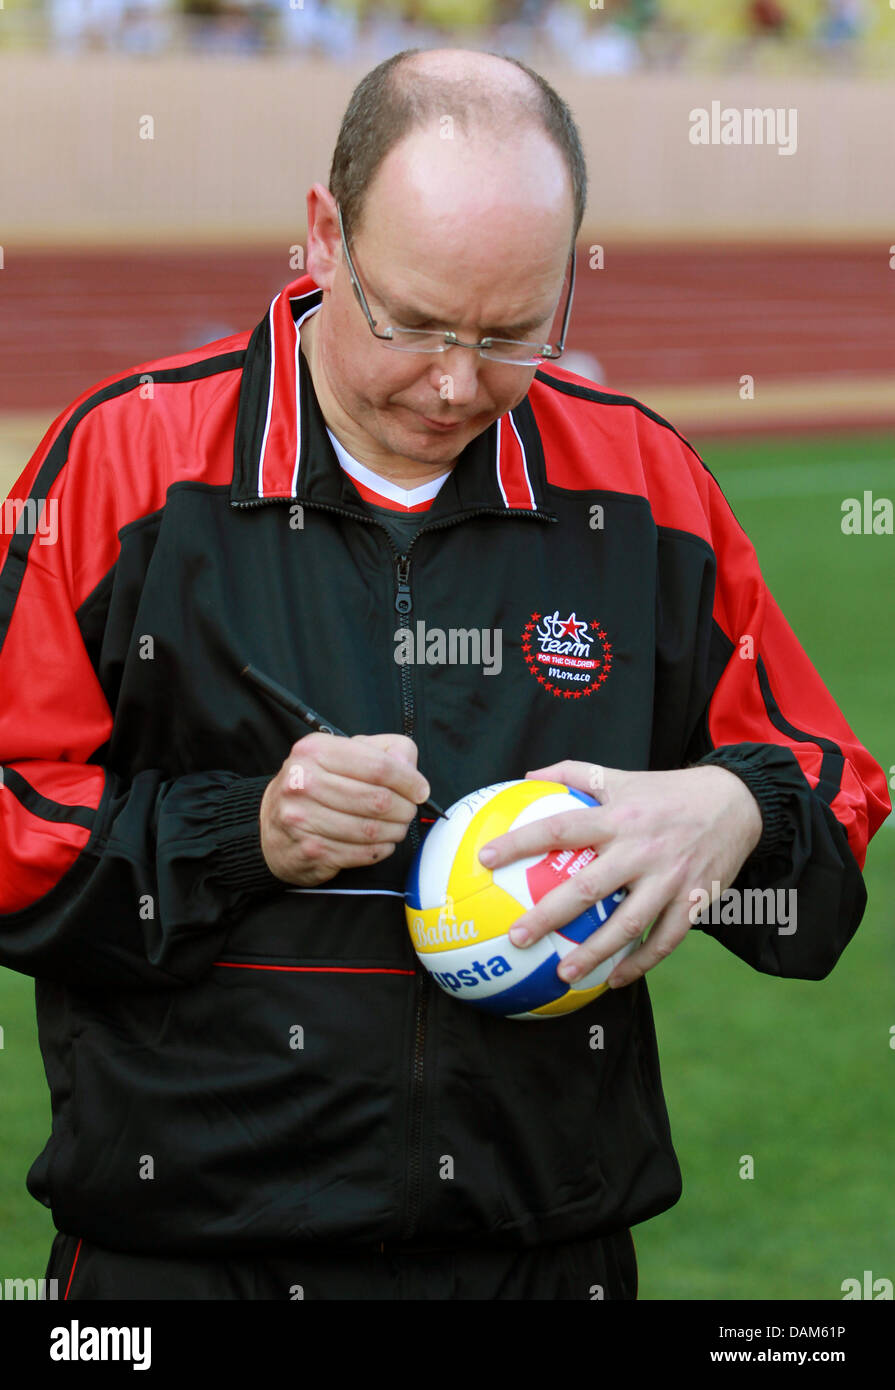 Prince Albert II of Monaco signs his autograph onto a soccer ball during a charity football match between racing drivers and celebrities prior to the Formula One Grand Prix of Monaco in Monte Carlo, Monaco, 24 May 2011. The Grand Prix will take place on 29 May. Photo: Jens Buettner dpa Stock Photo